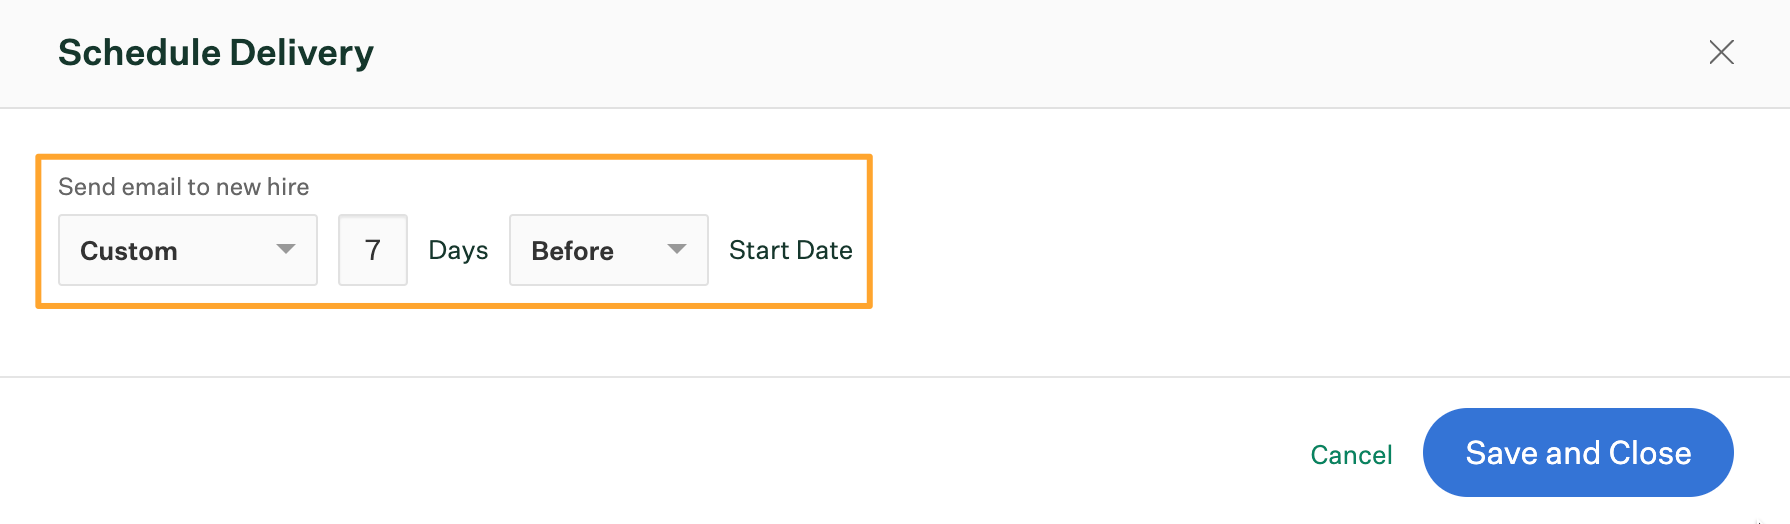 Your next steps delivery schedule with custom option selected for 7 days prior